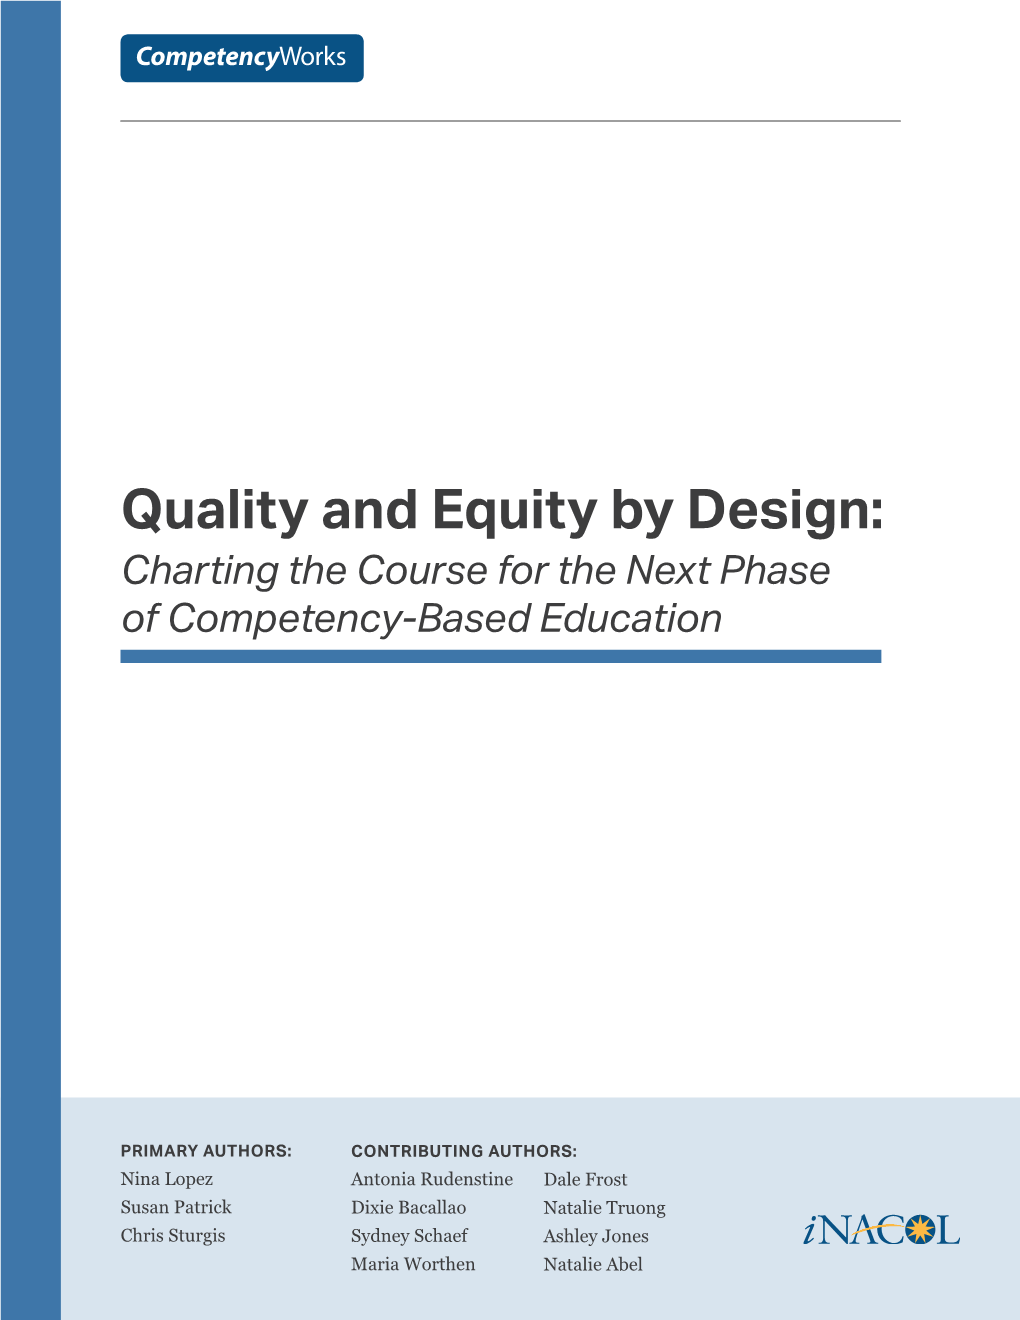 Quality and Equity by Design: Charting the Course for the Next Phase of Competency-Based Education